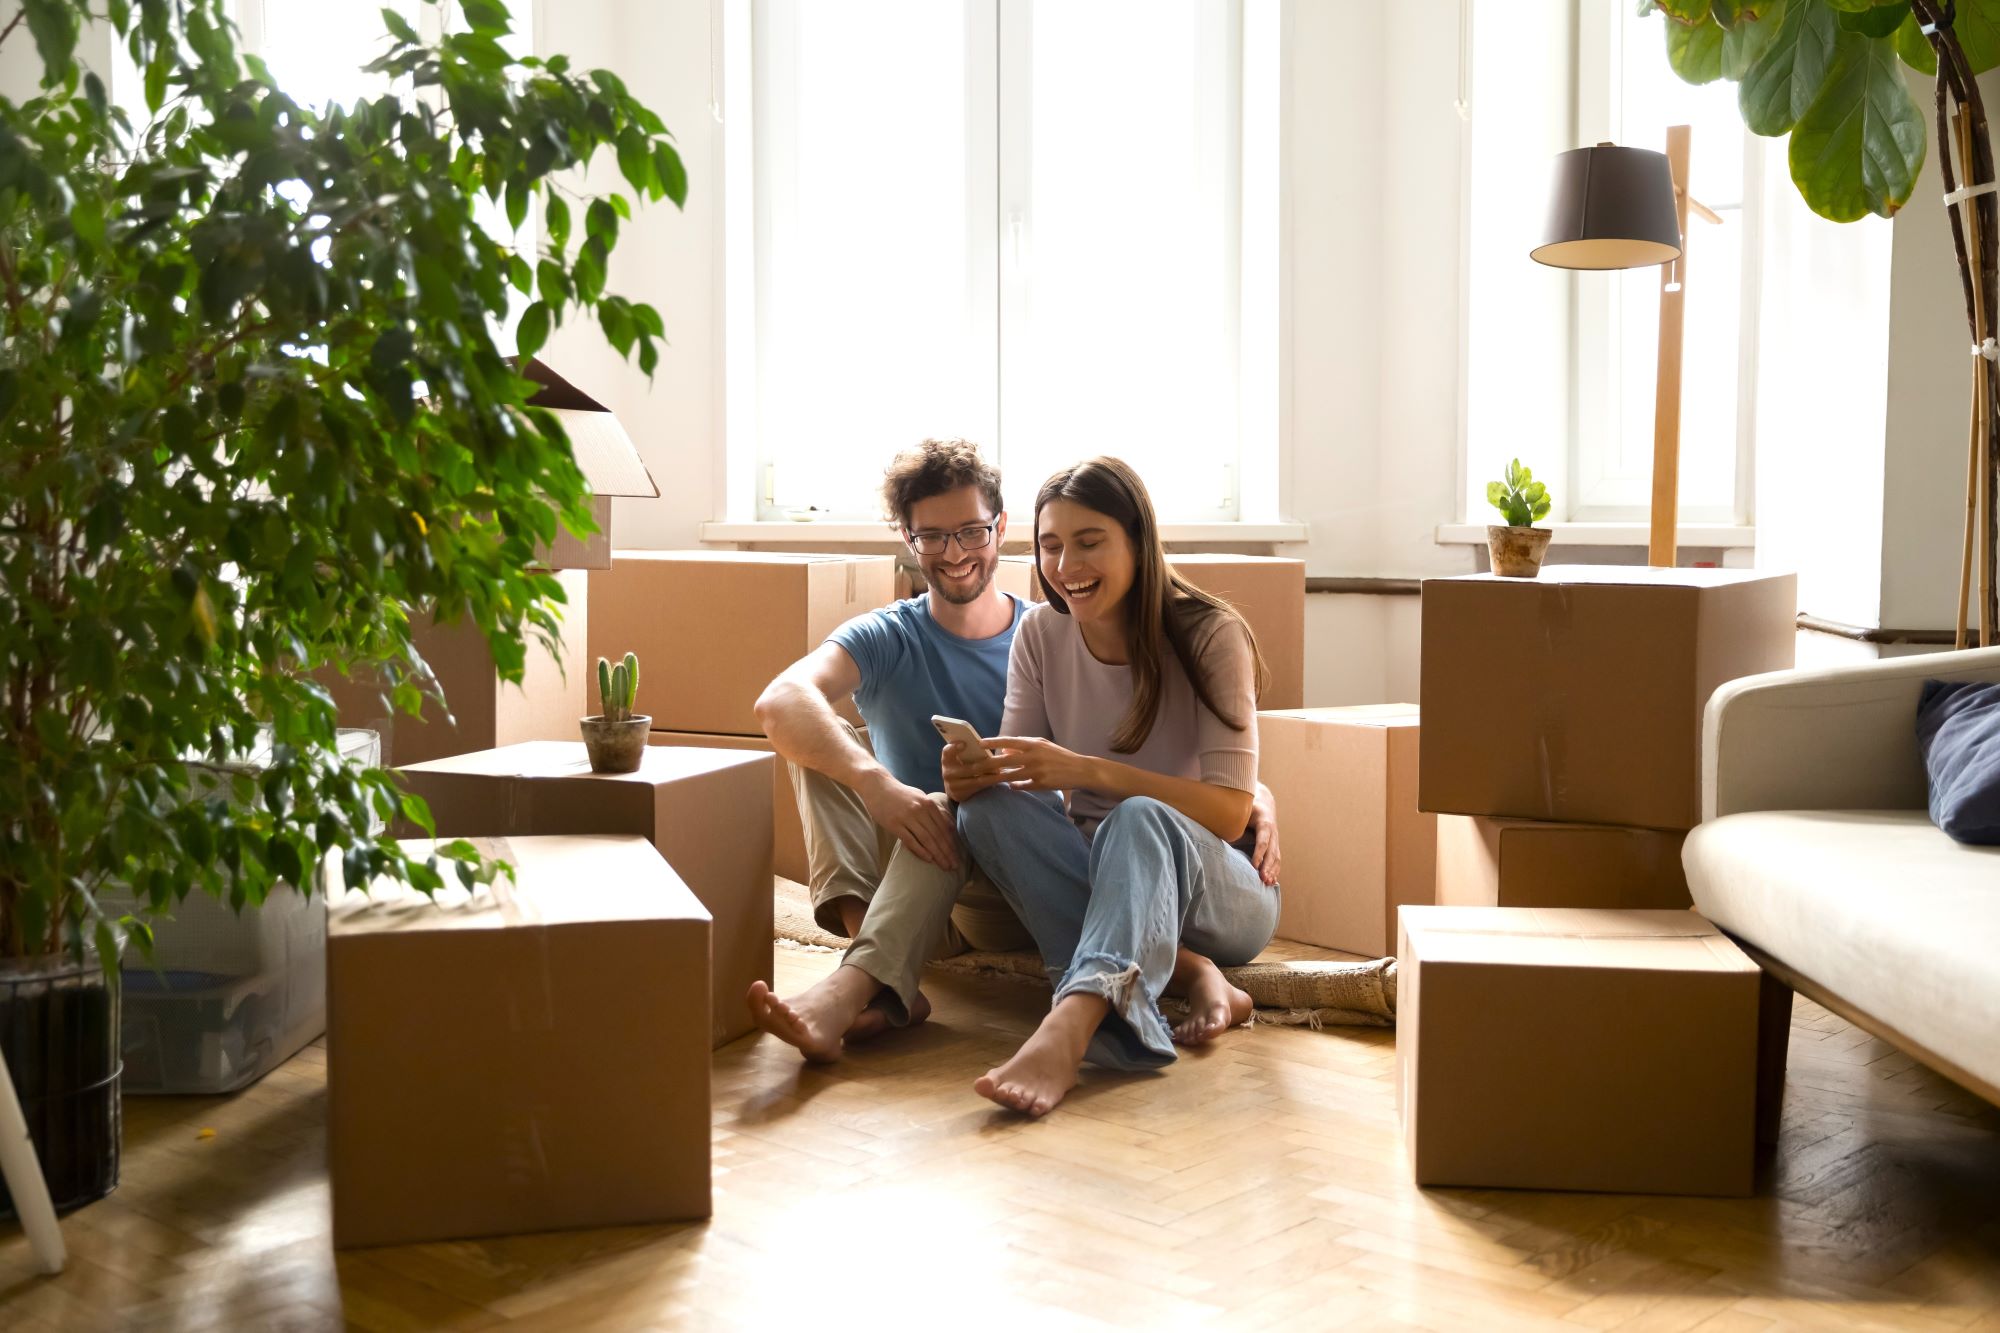 Happy young couple sitting in an apartment surrounded by their boxed belongings.